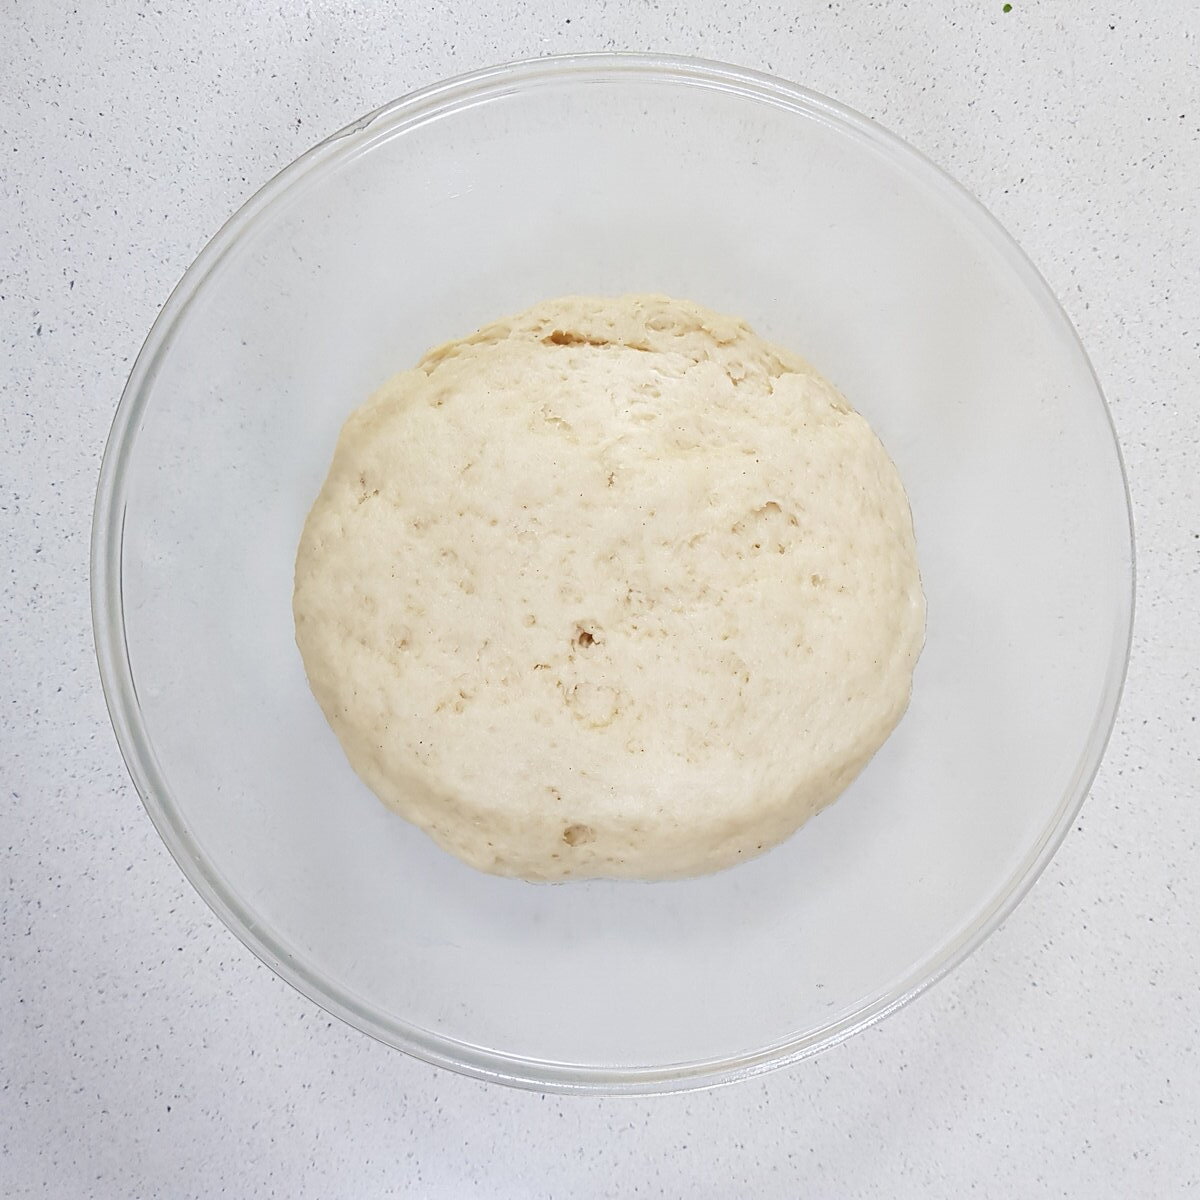 Dough after (1½hrs) Proofing